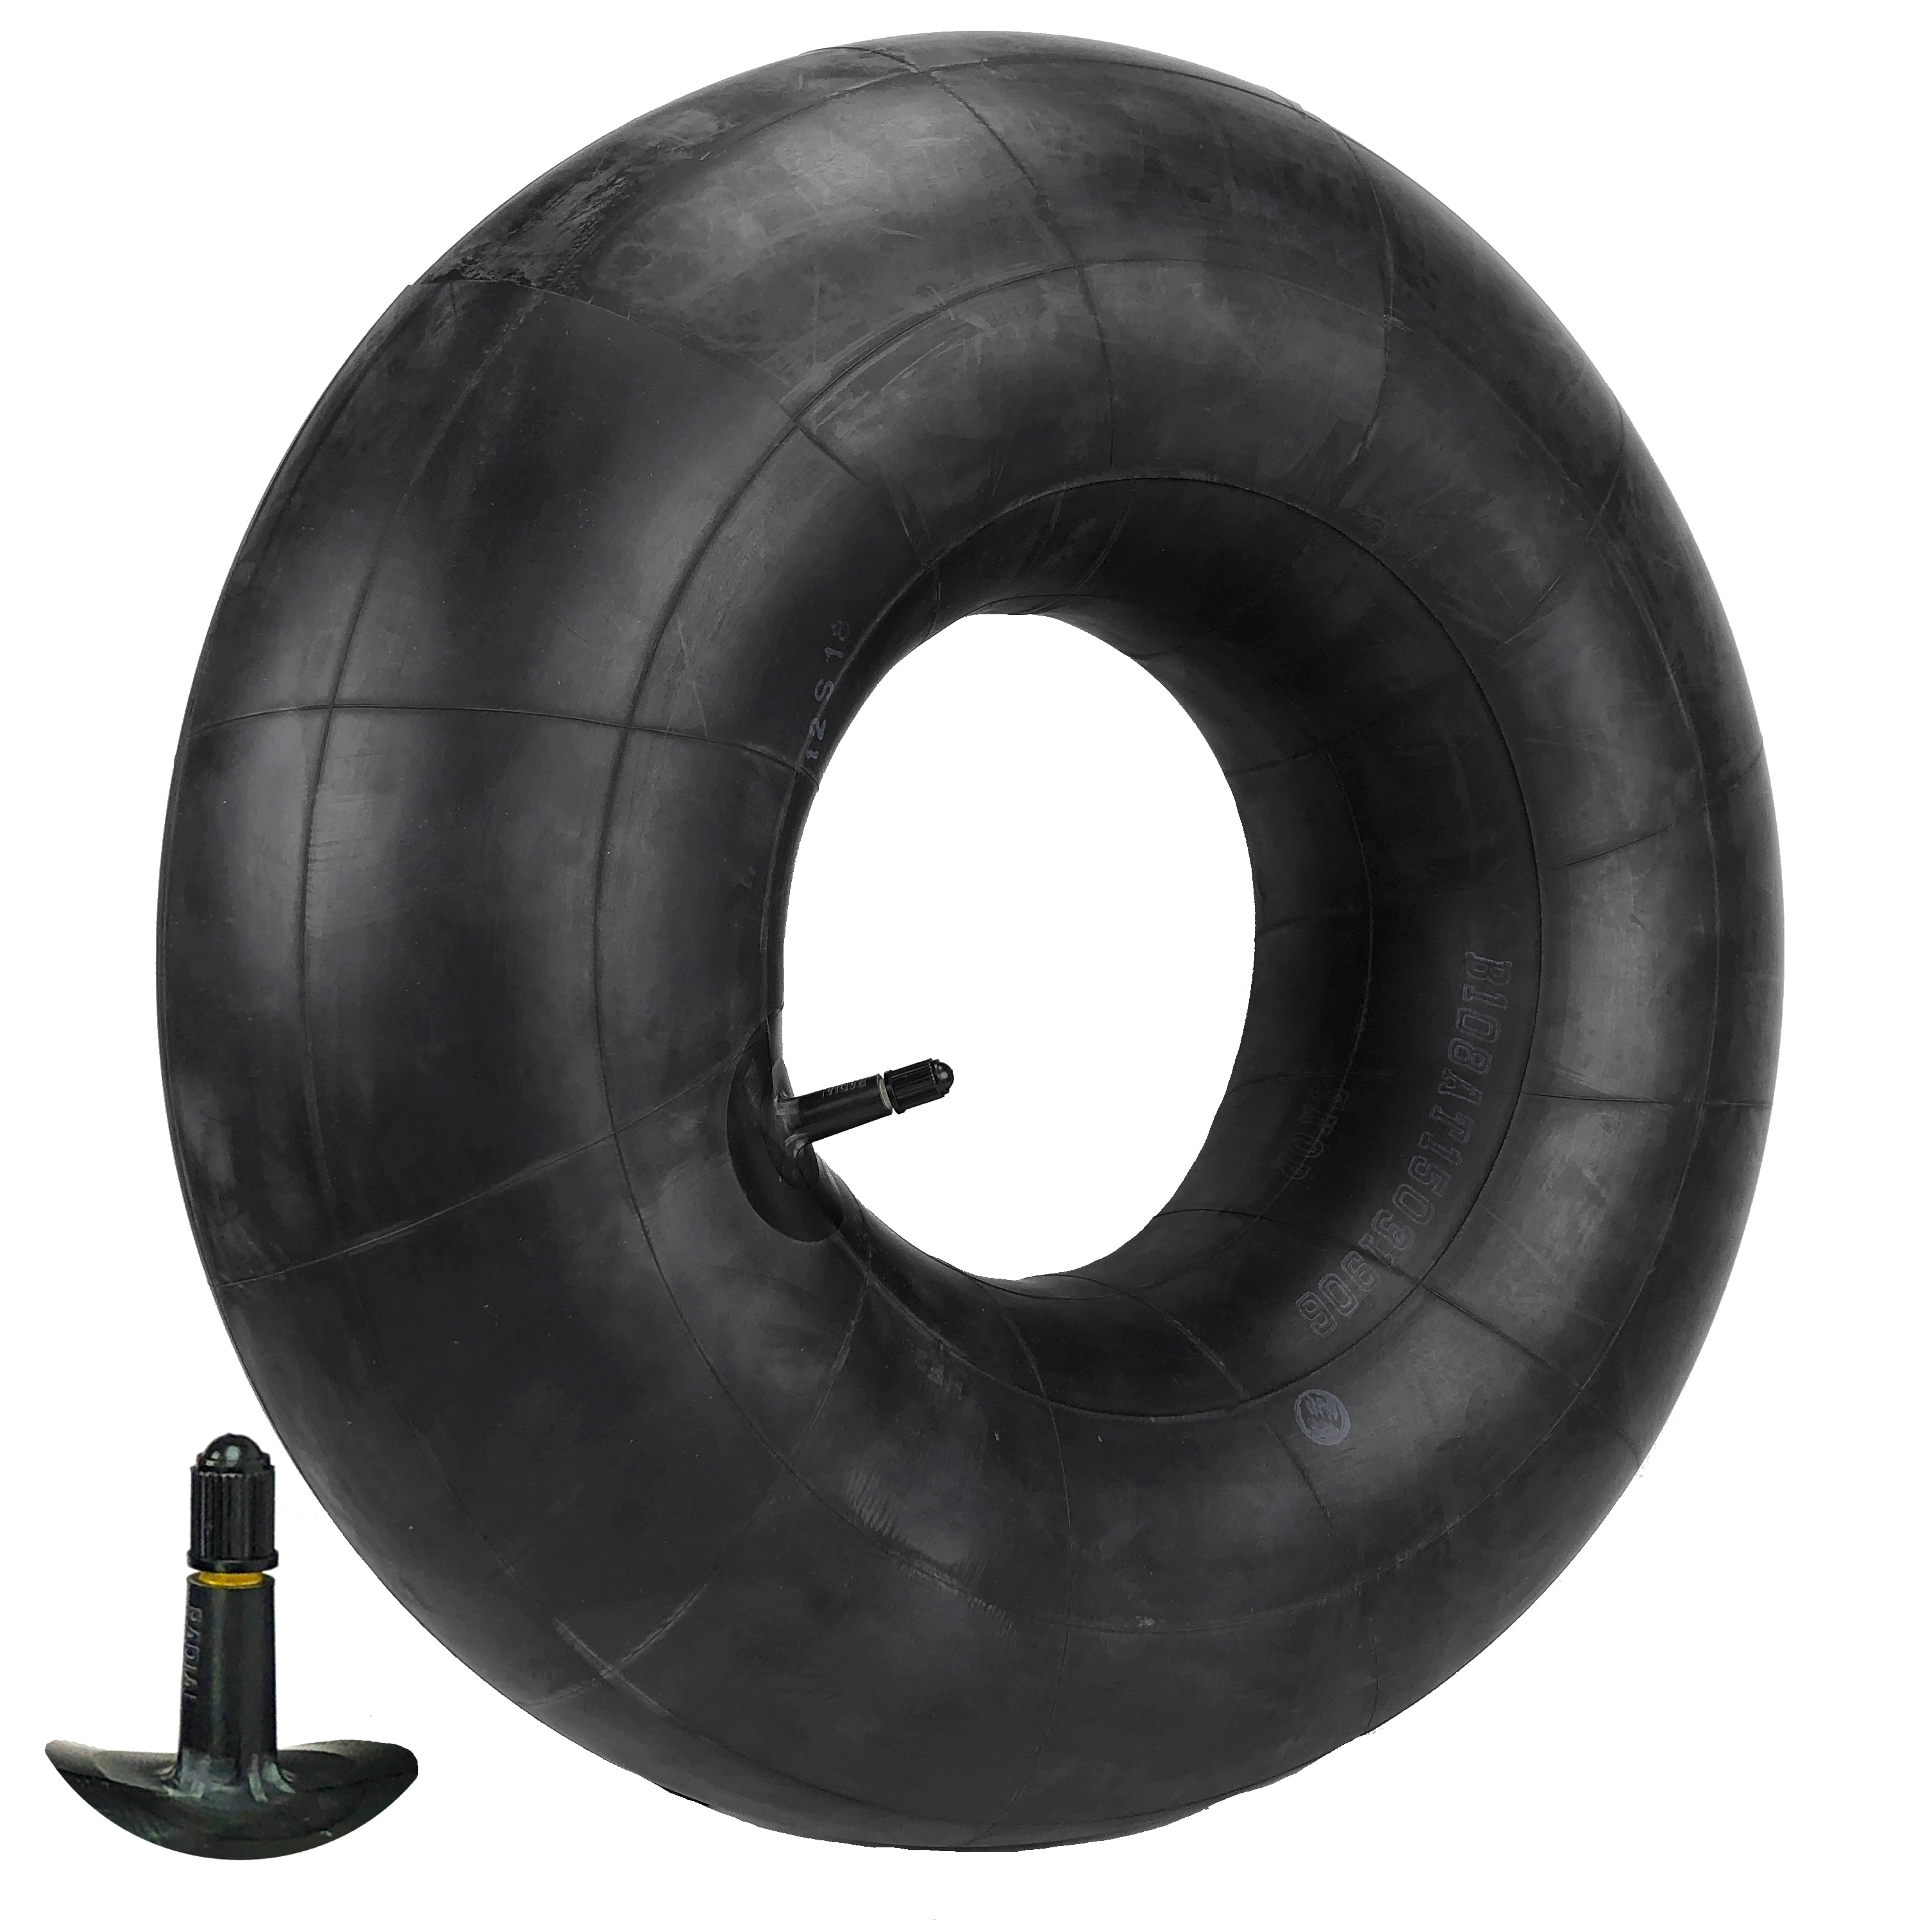 13x5.00-6 INNER TUBE For Ride On Lawn Mower Garden Tractor 13x500-6 